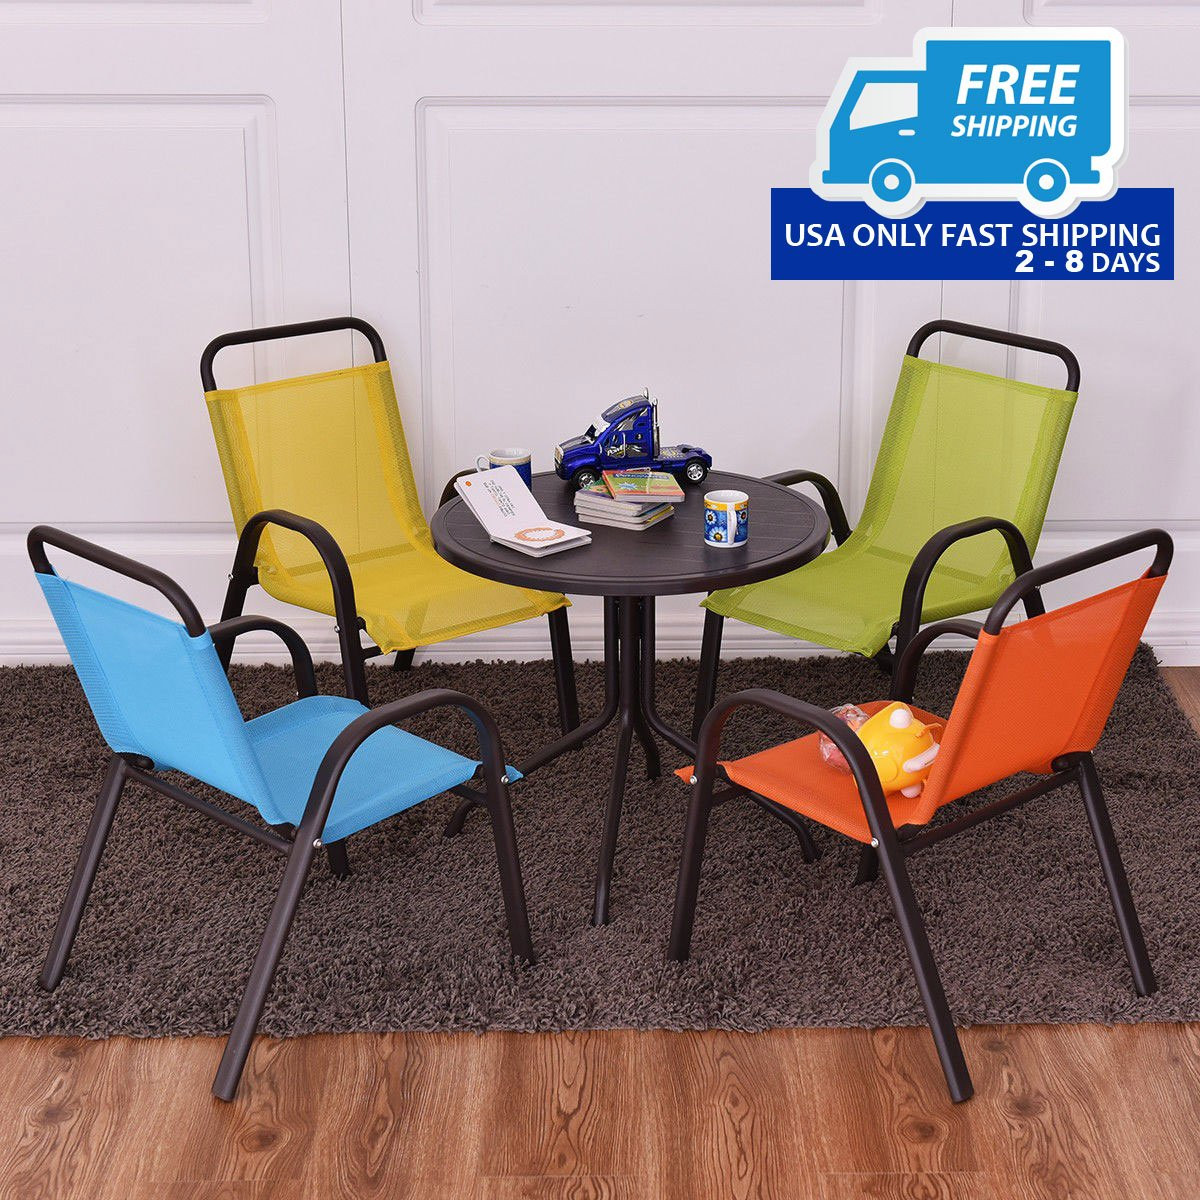 Kids Dining Table
 Patio Indoor 5 pcs Kids Dining Table and Chairs Play Set